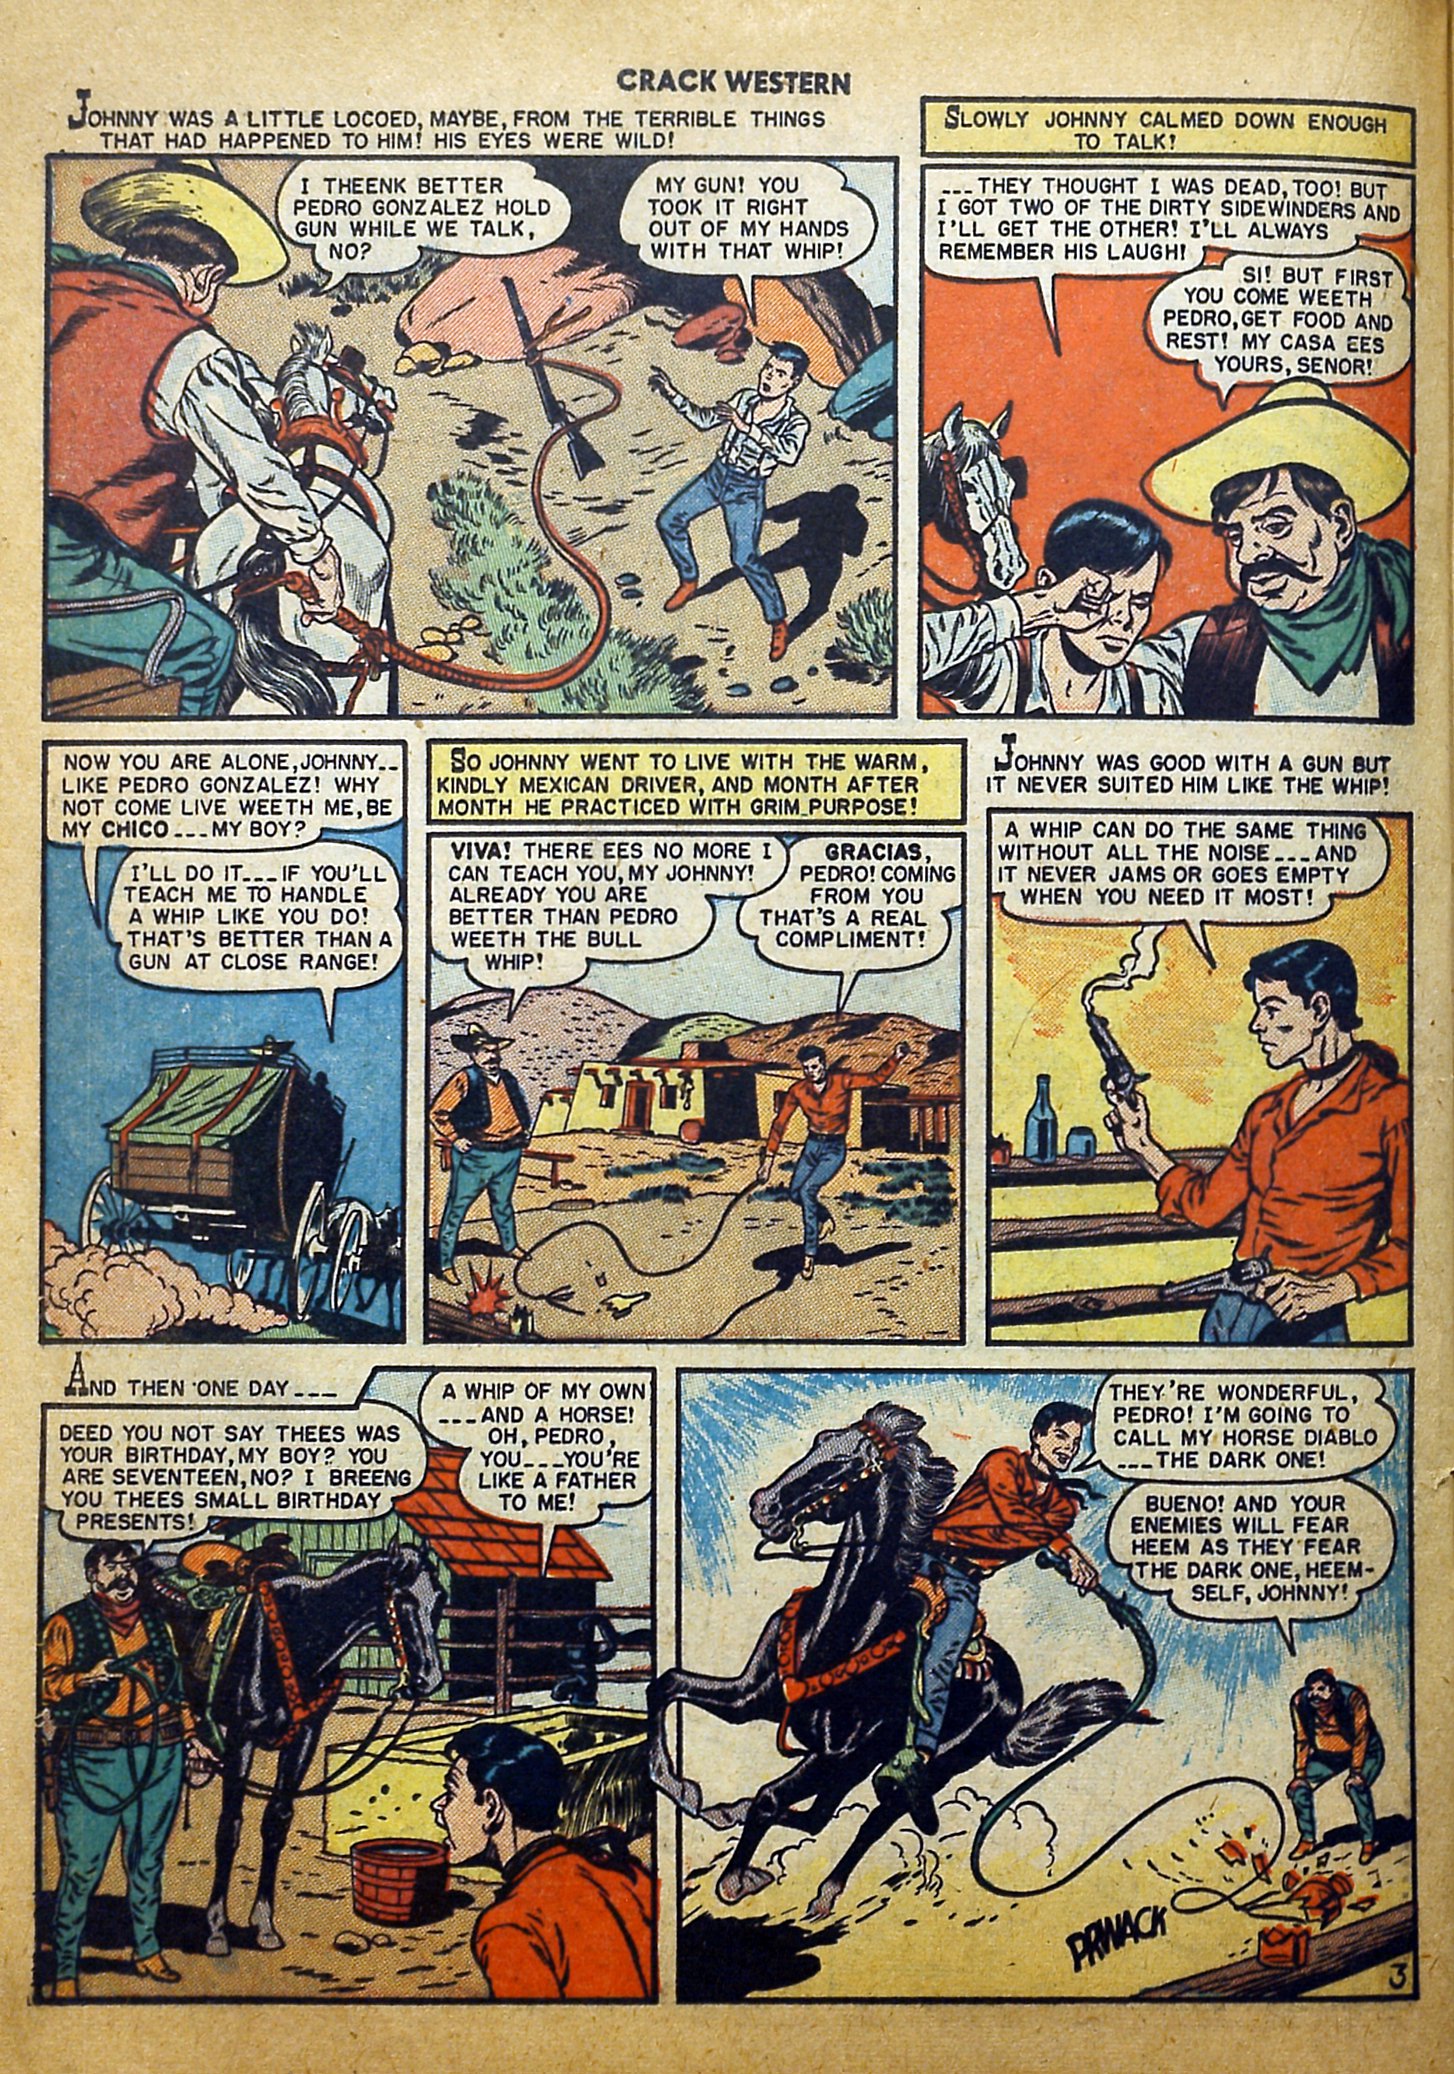 Read online Crack Western comic -  Issue #70 - 34